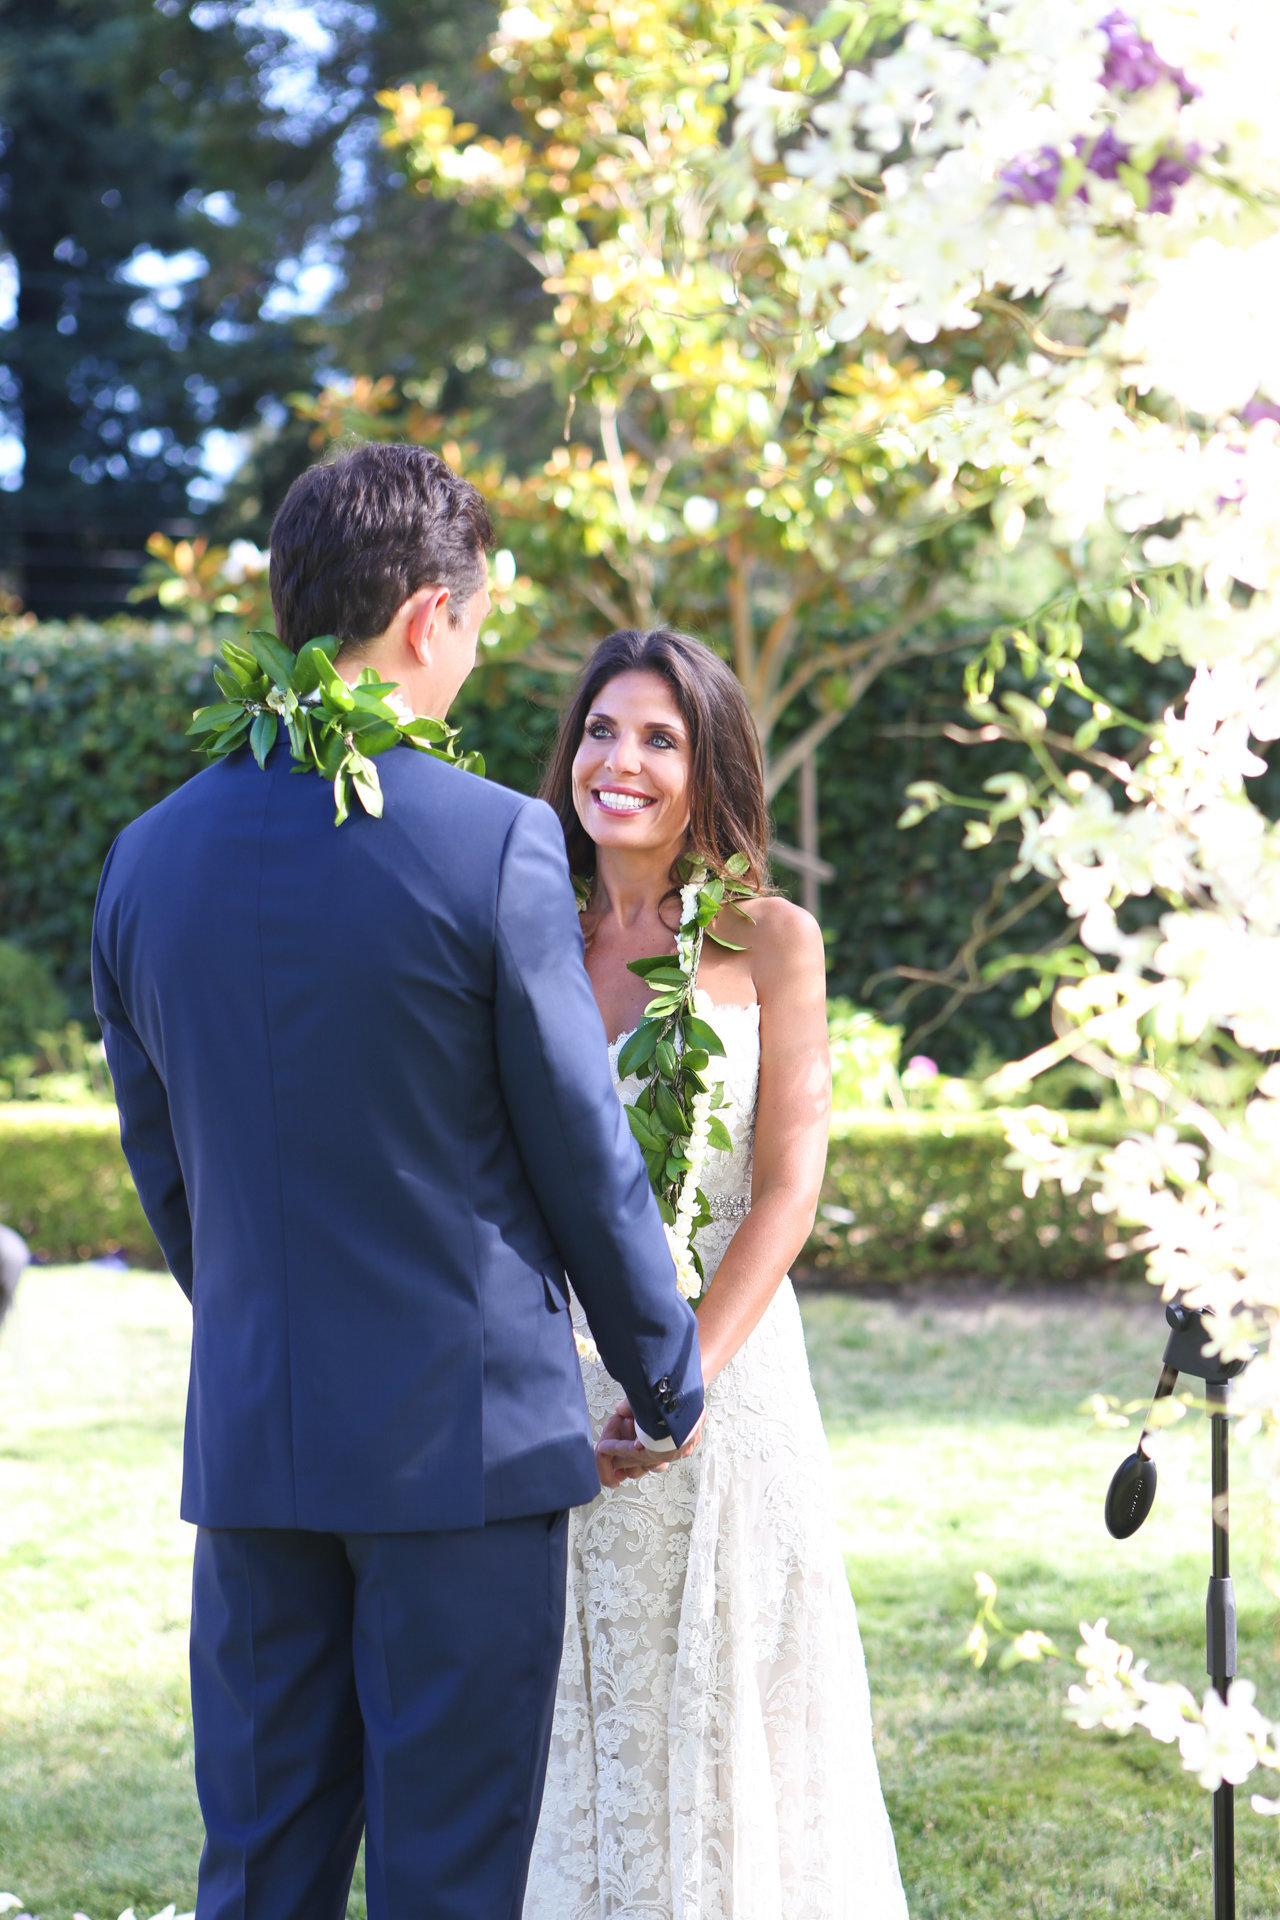 In stunning atherton wedding, bride and groom pose for a natural light portrait